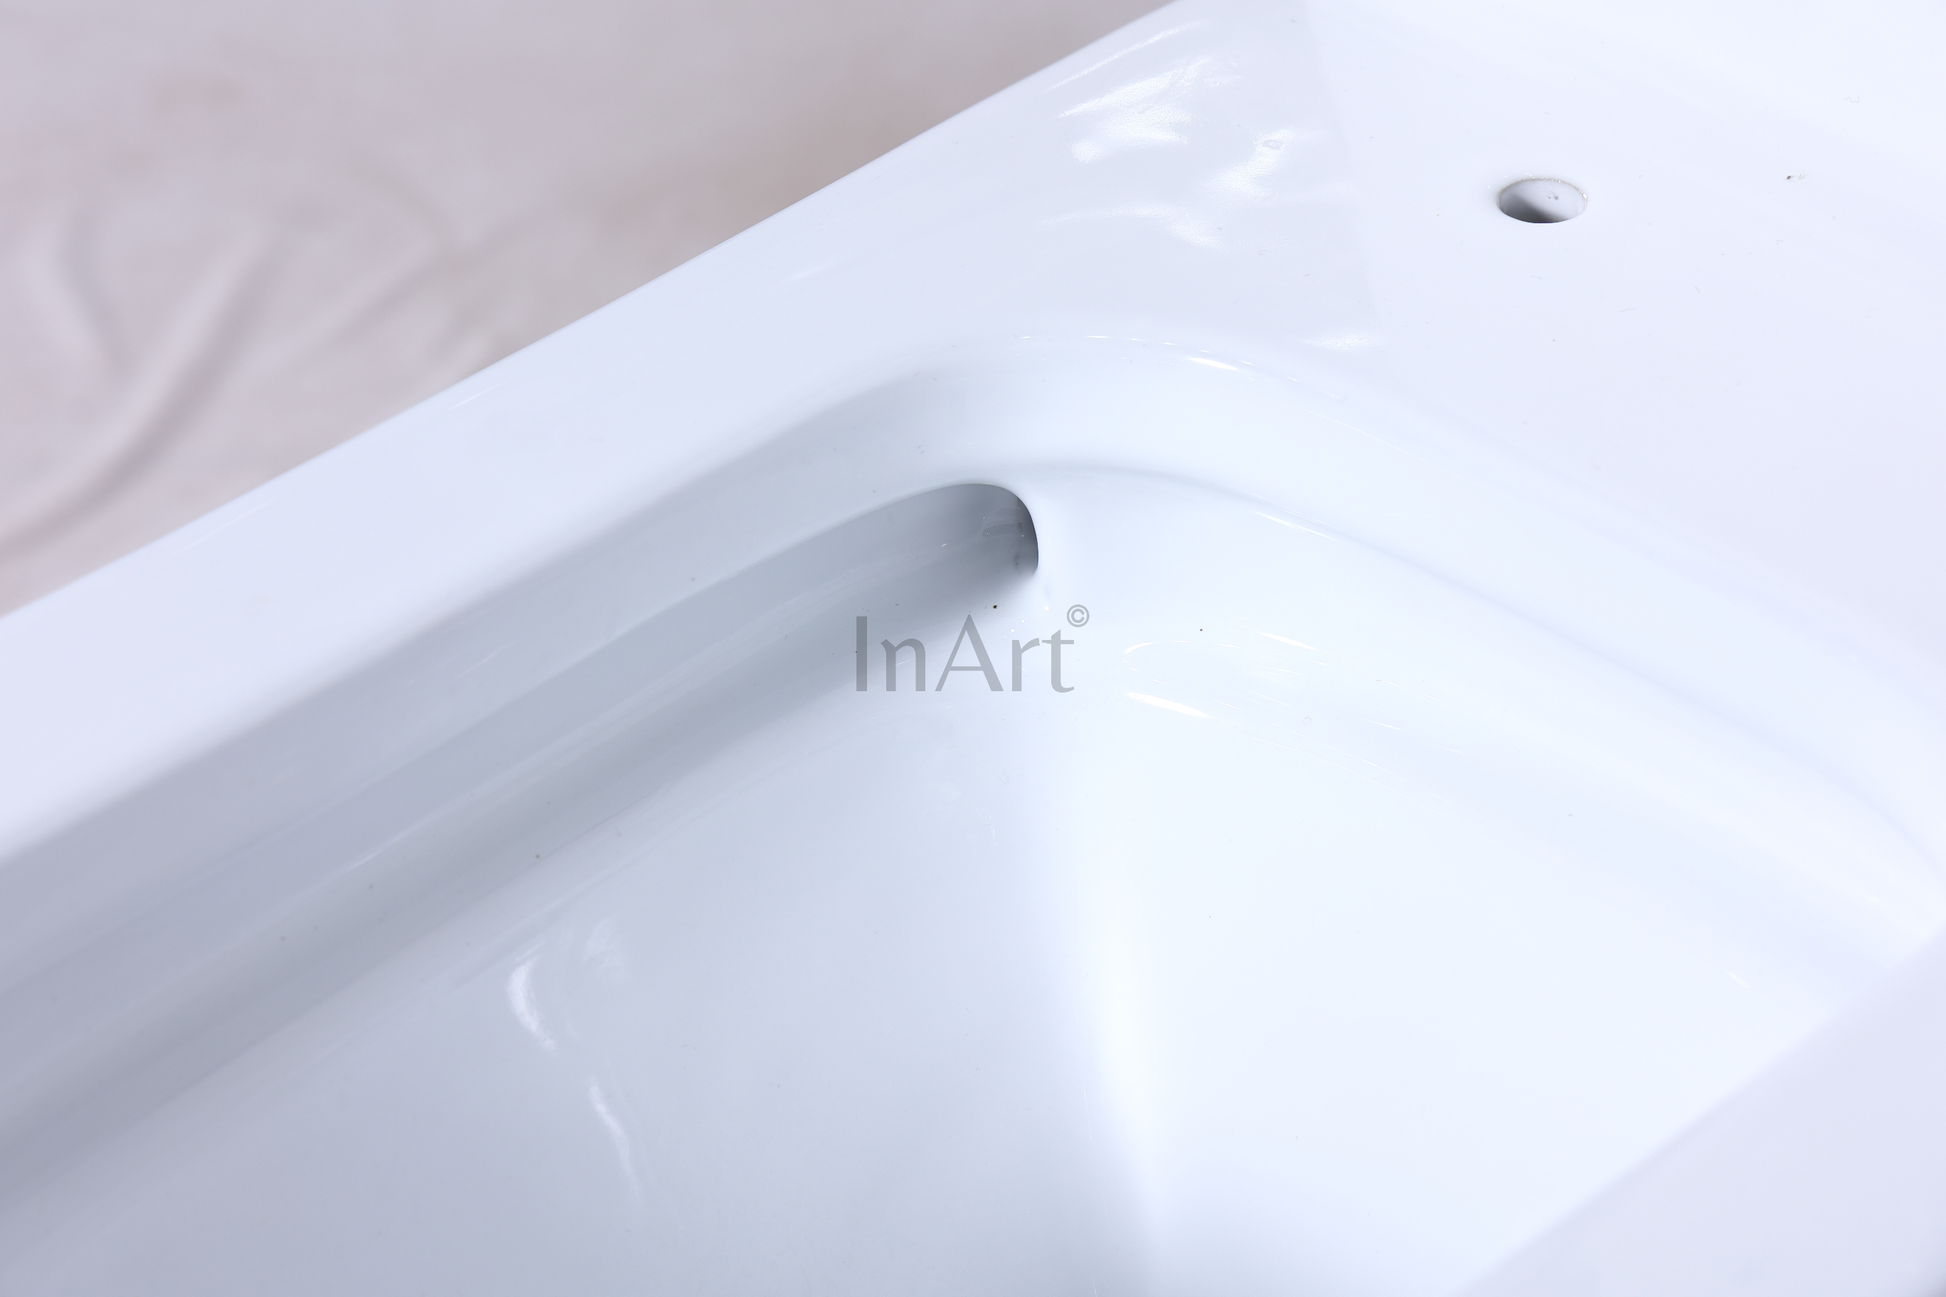 Inart Rimless 6D Flushing Syphonic One Piece Ceramic Western Floor Mounted One Piece Water Closet Western Toilet/Commode/European Commode - InArt-Studio